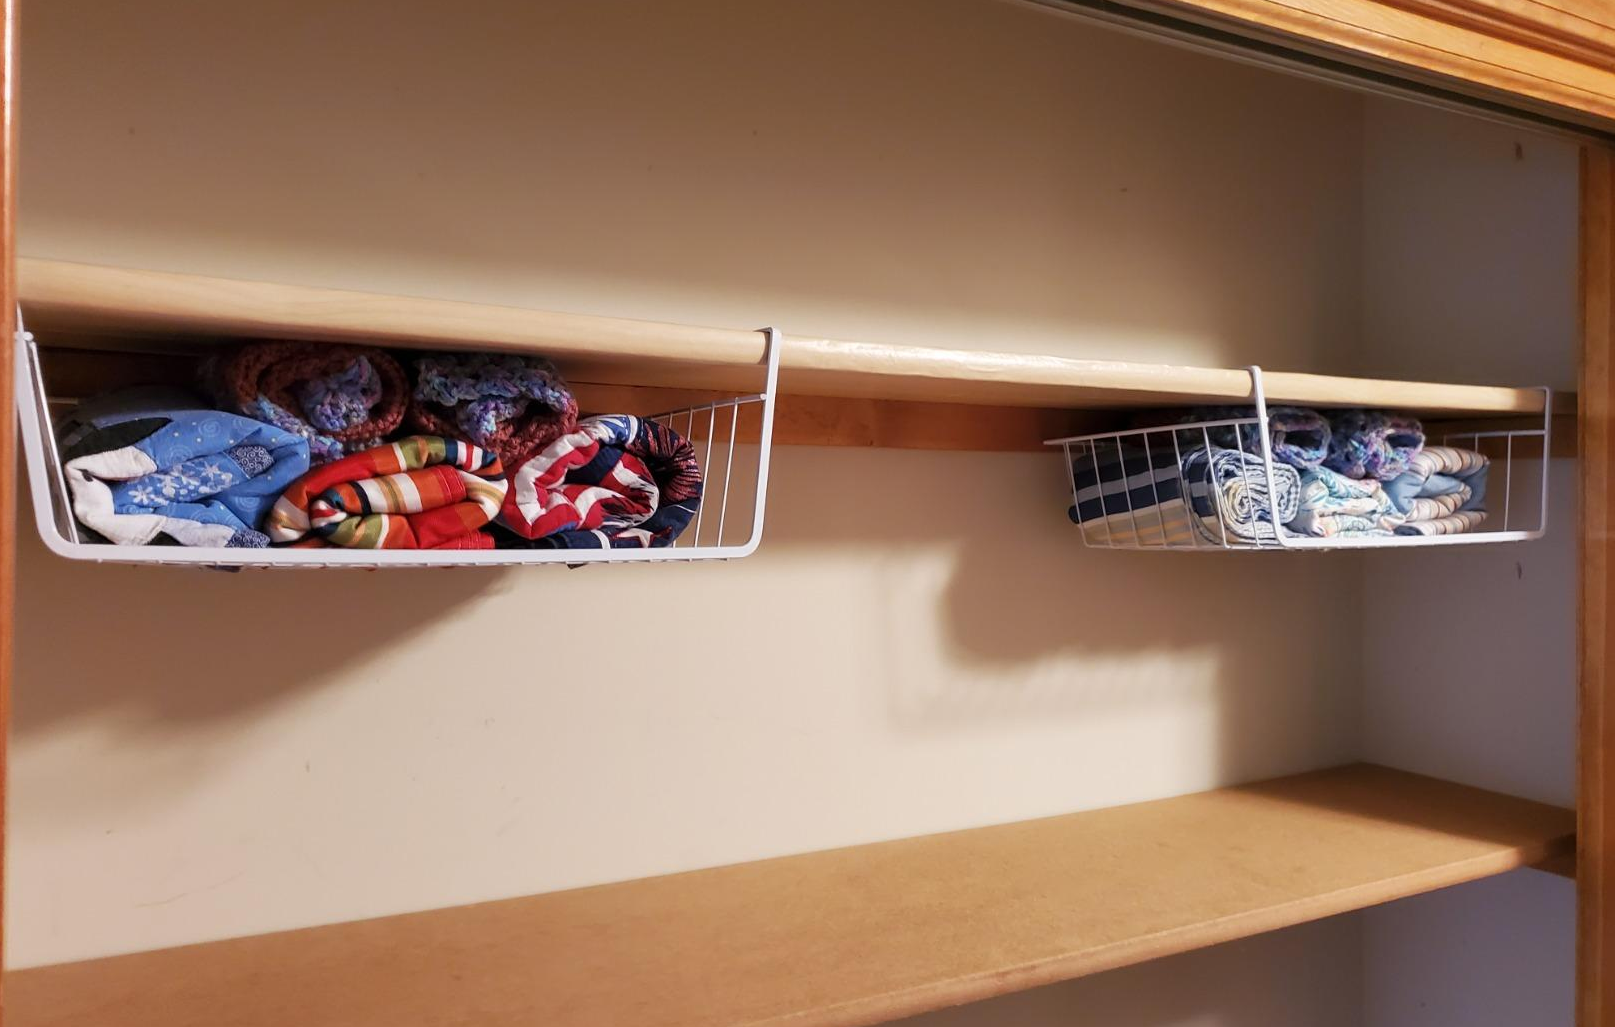 Storage Solutions: Eliminate Wasted Space with Multi-Tier Shelving!